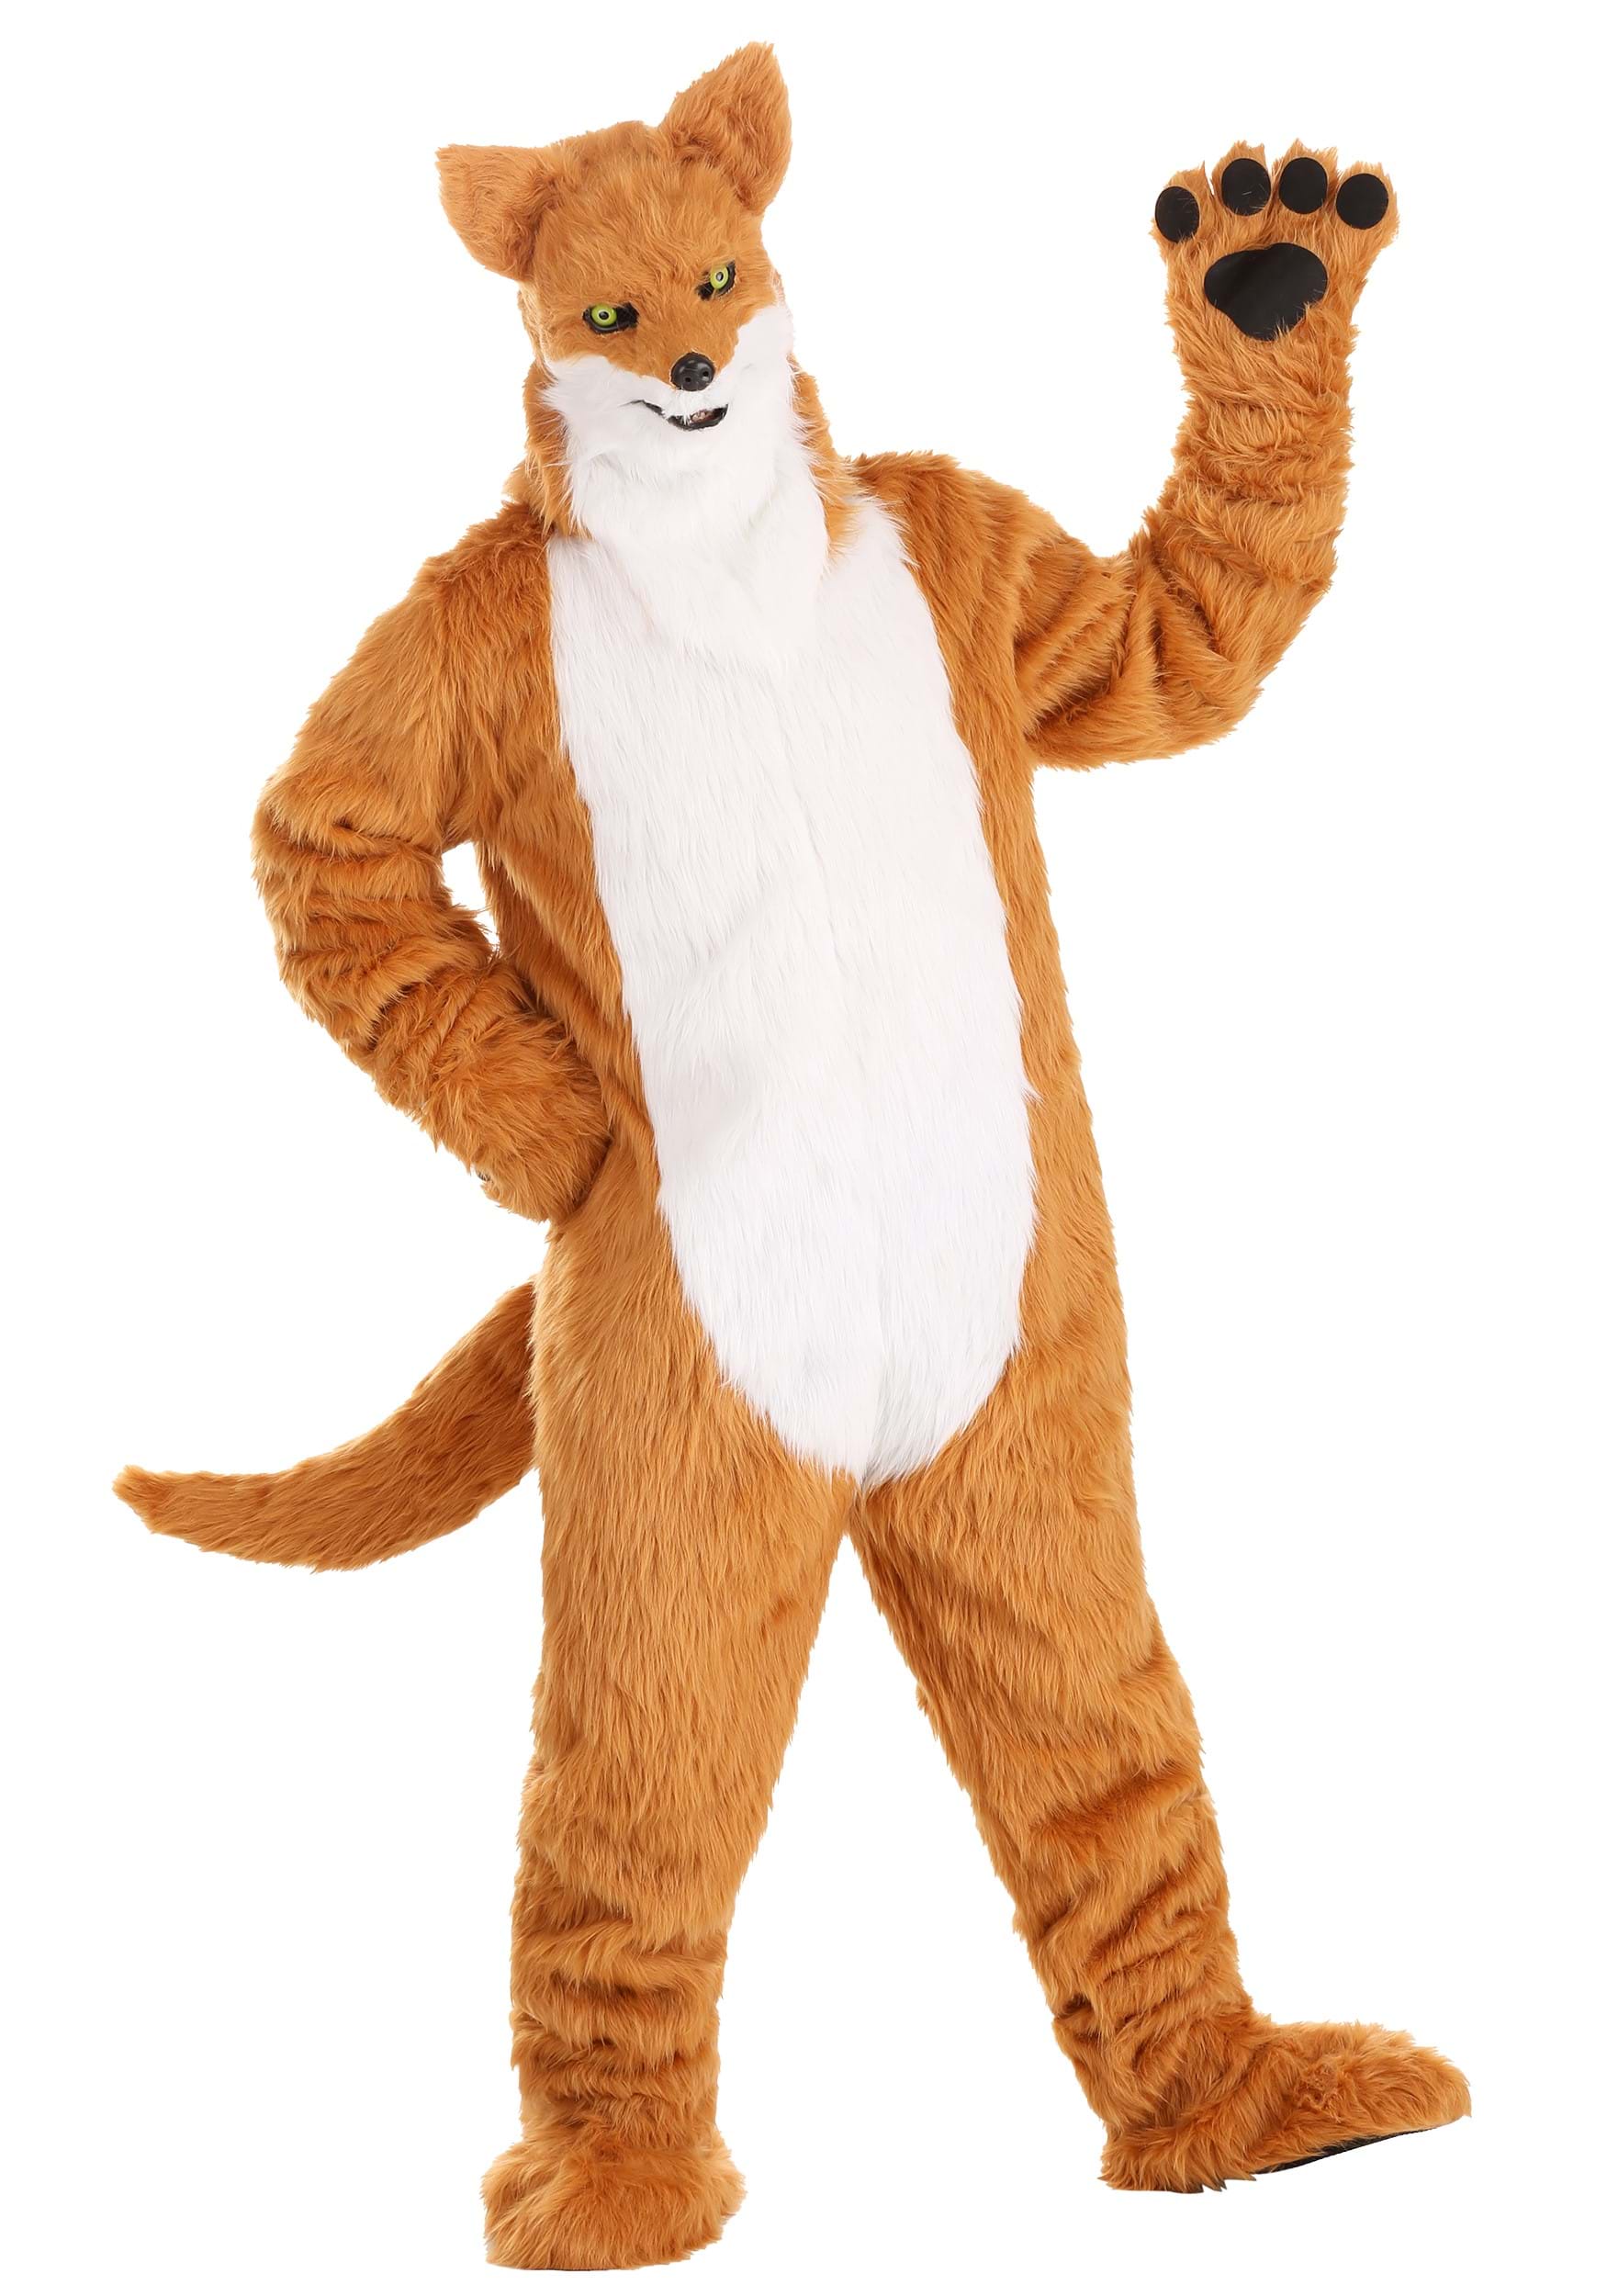 Adult's Fox Costume With Mouth Mover Mask